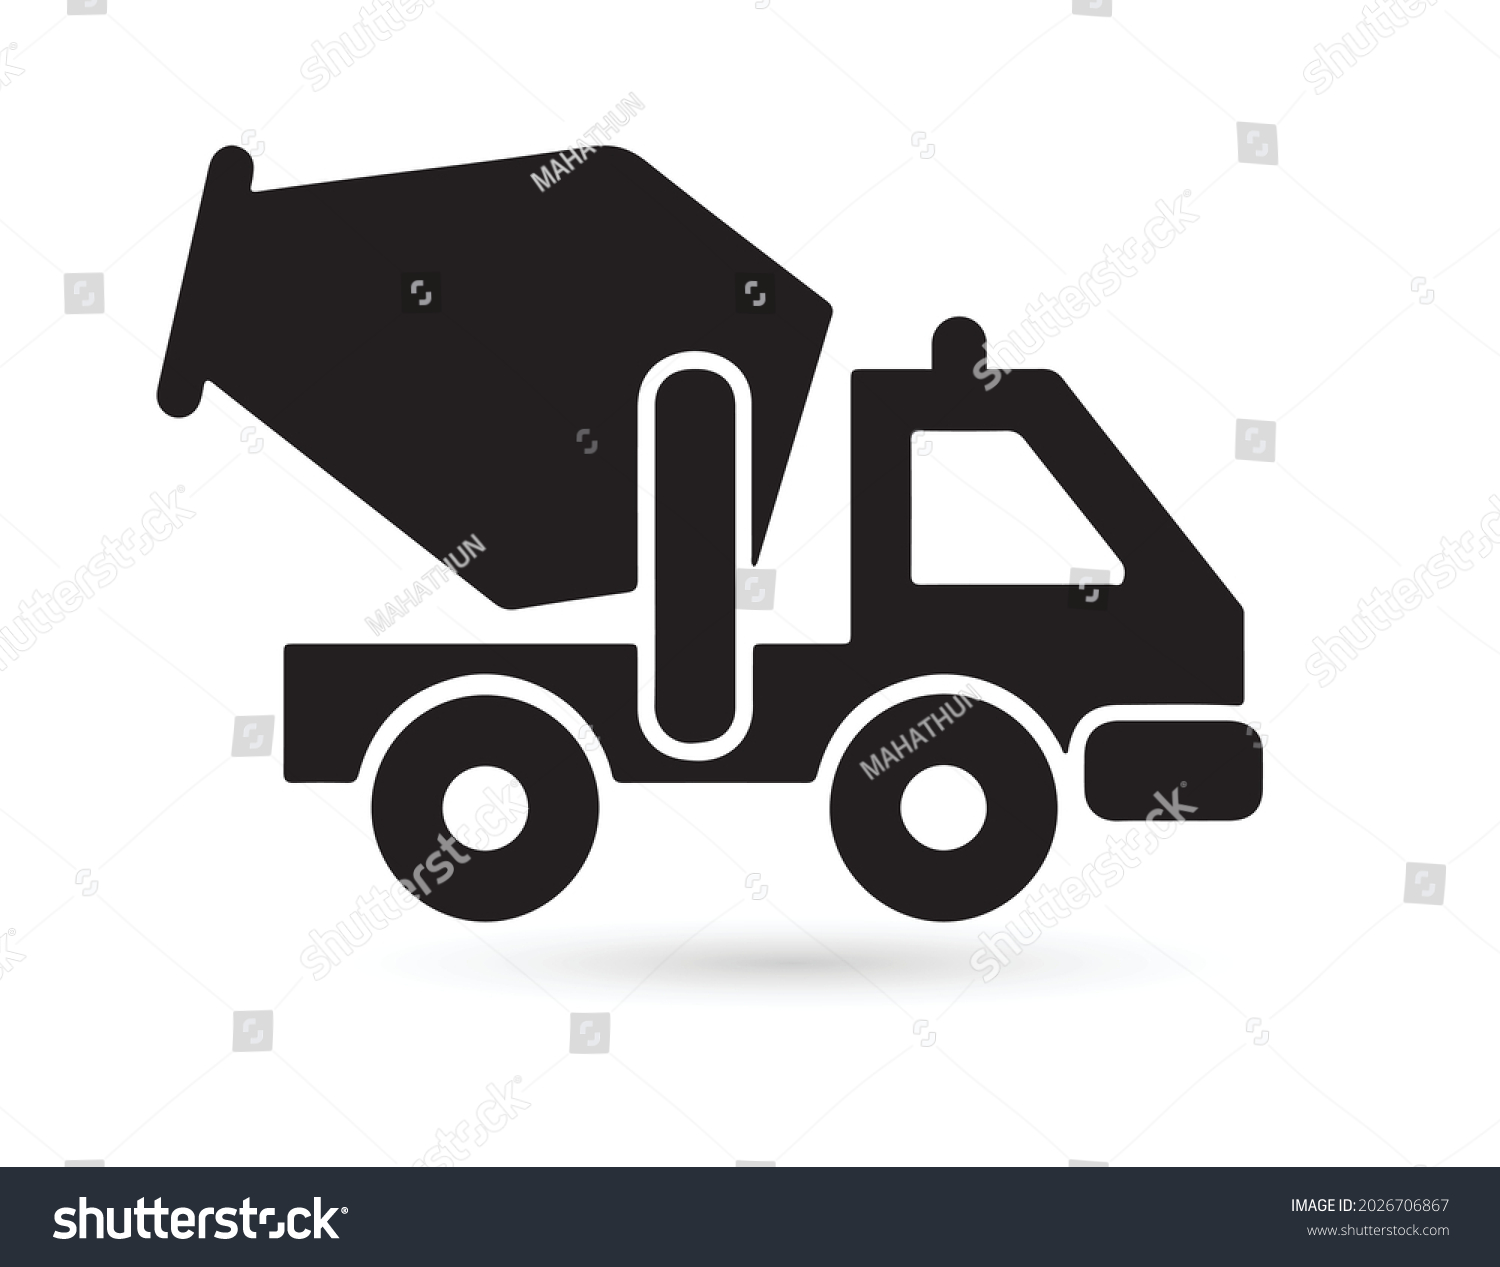 SVG of Concrete mixer icon, vector isolated simple mixer truck symbol. svg